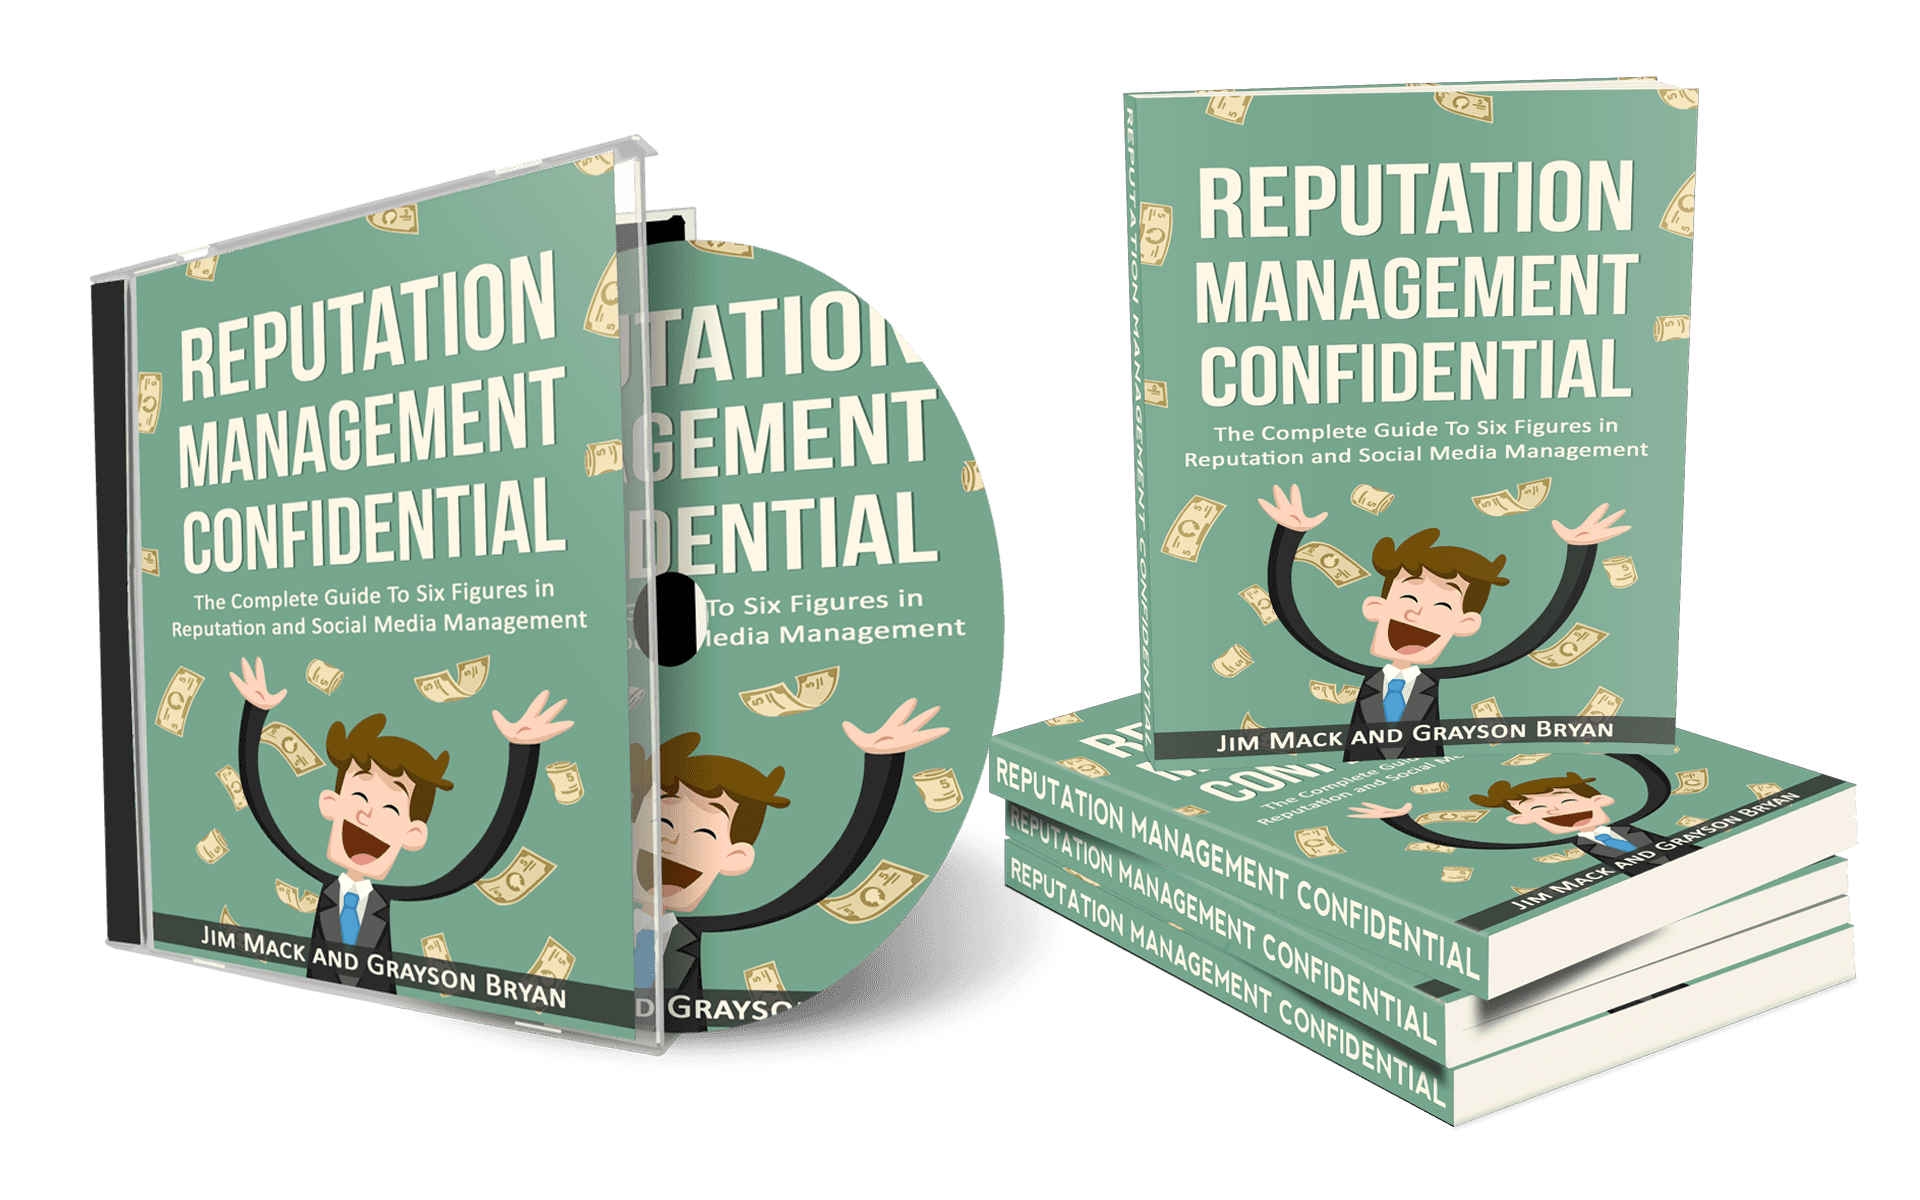 The complete guide to six figures in reputation and social media management.（Reputation Management Confidential）